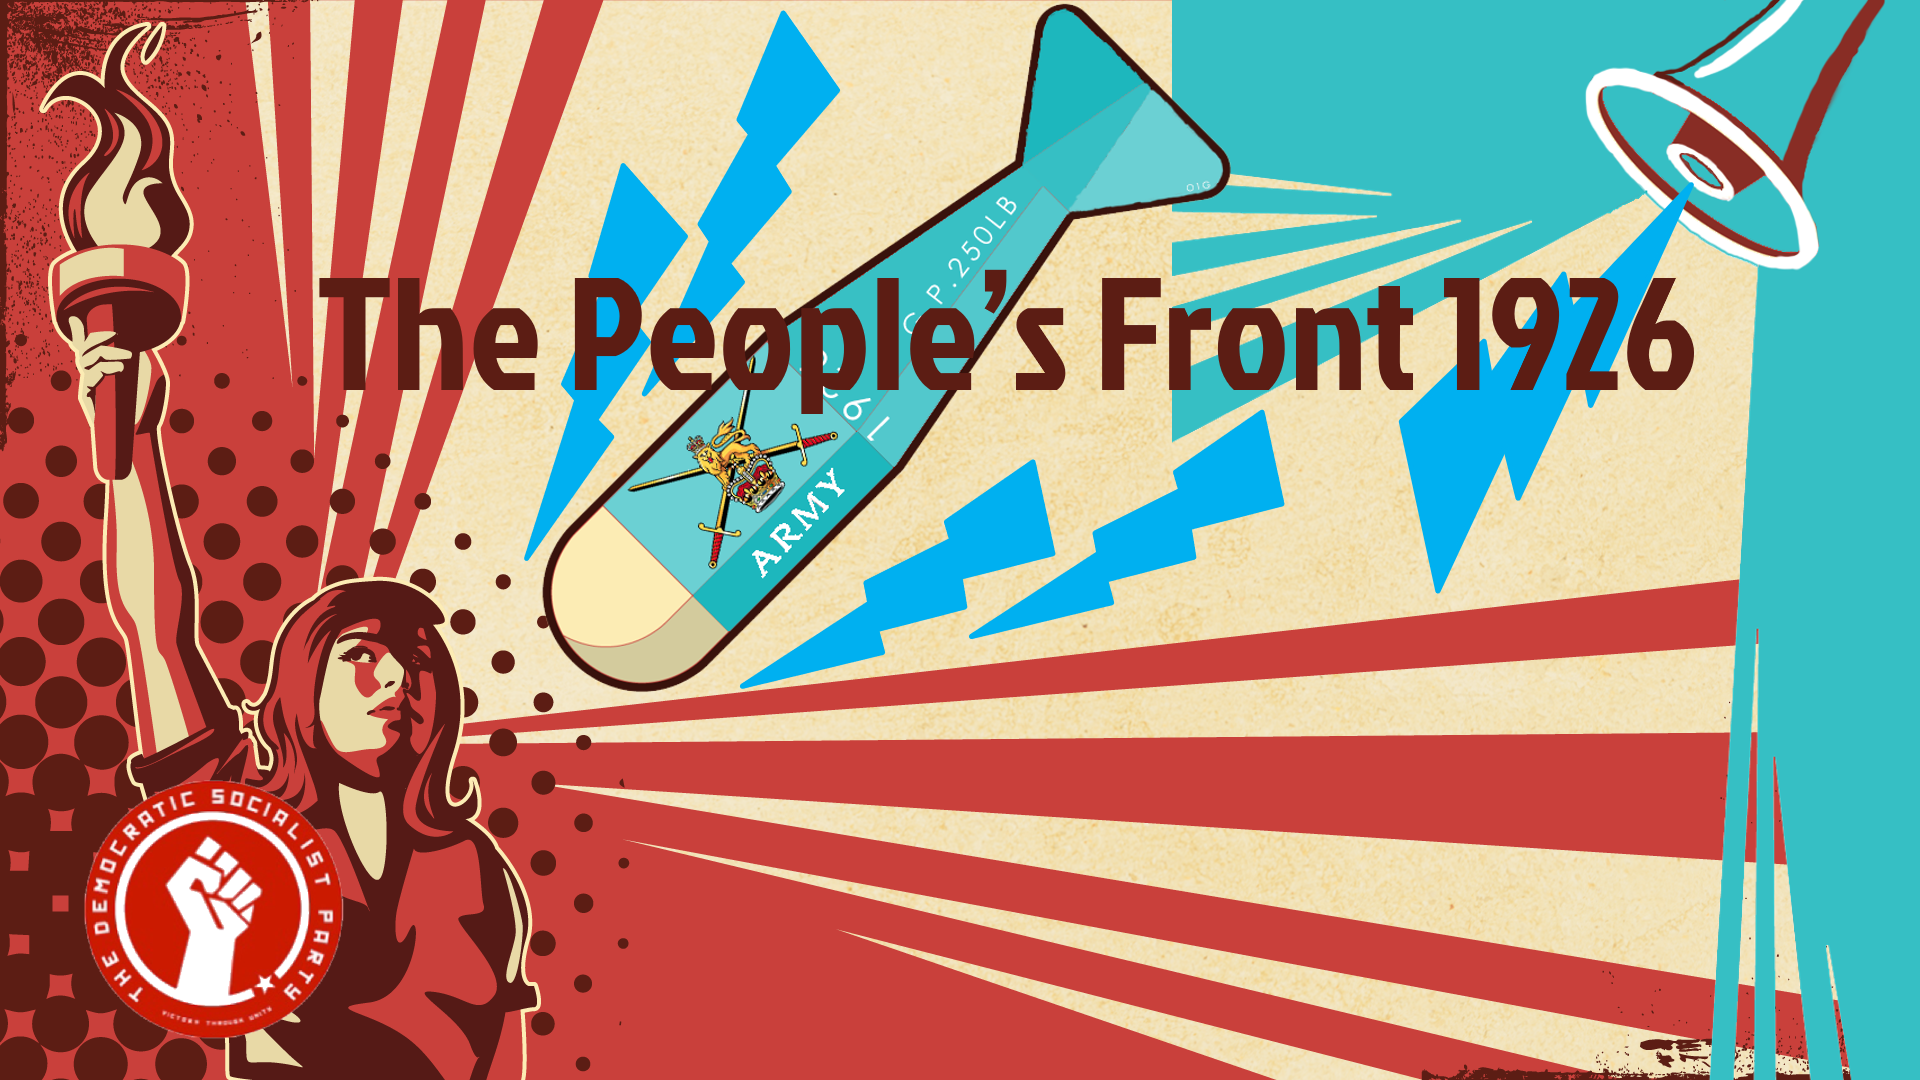 The People's Front 1926